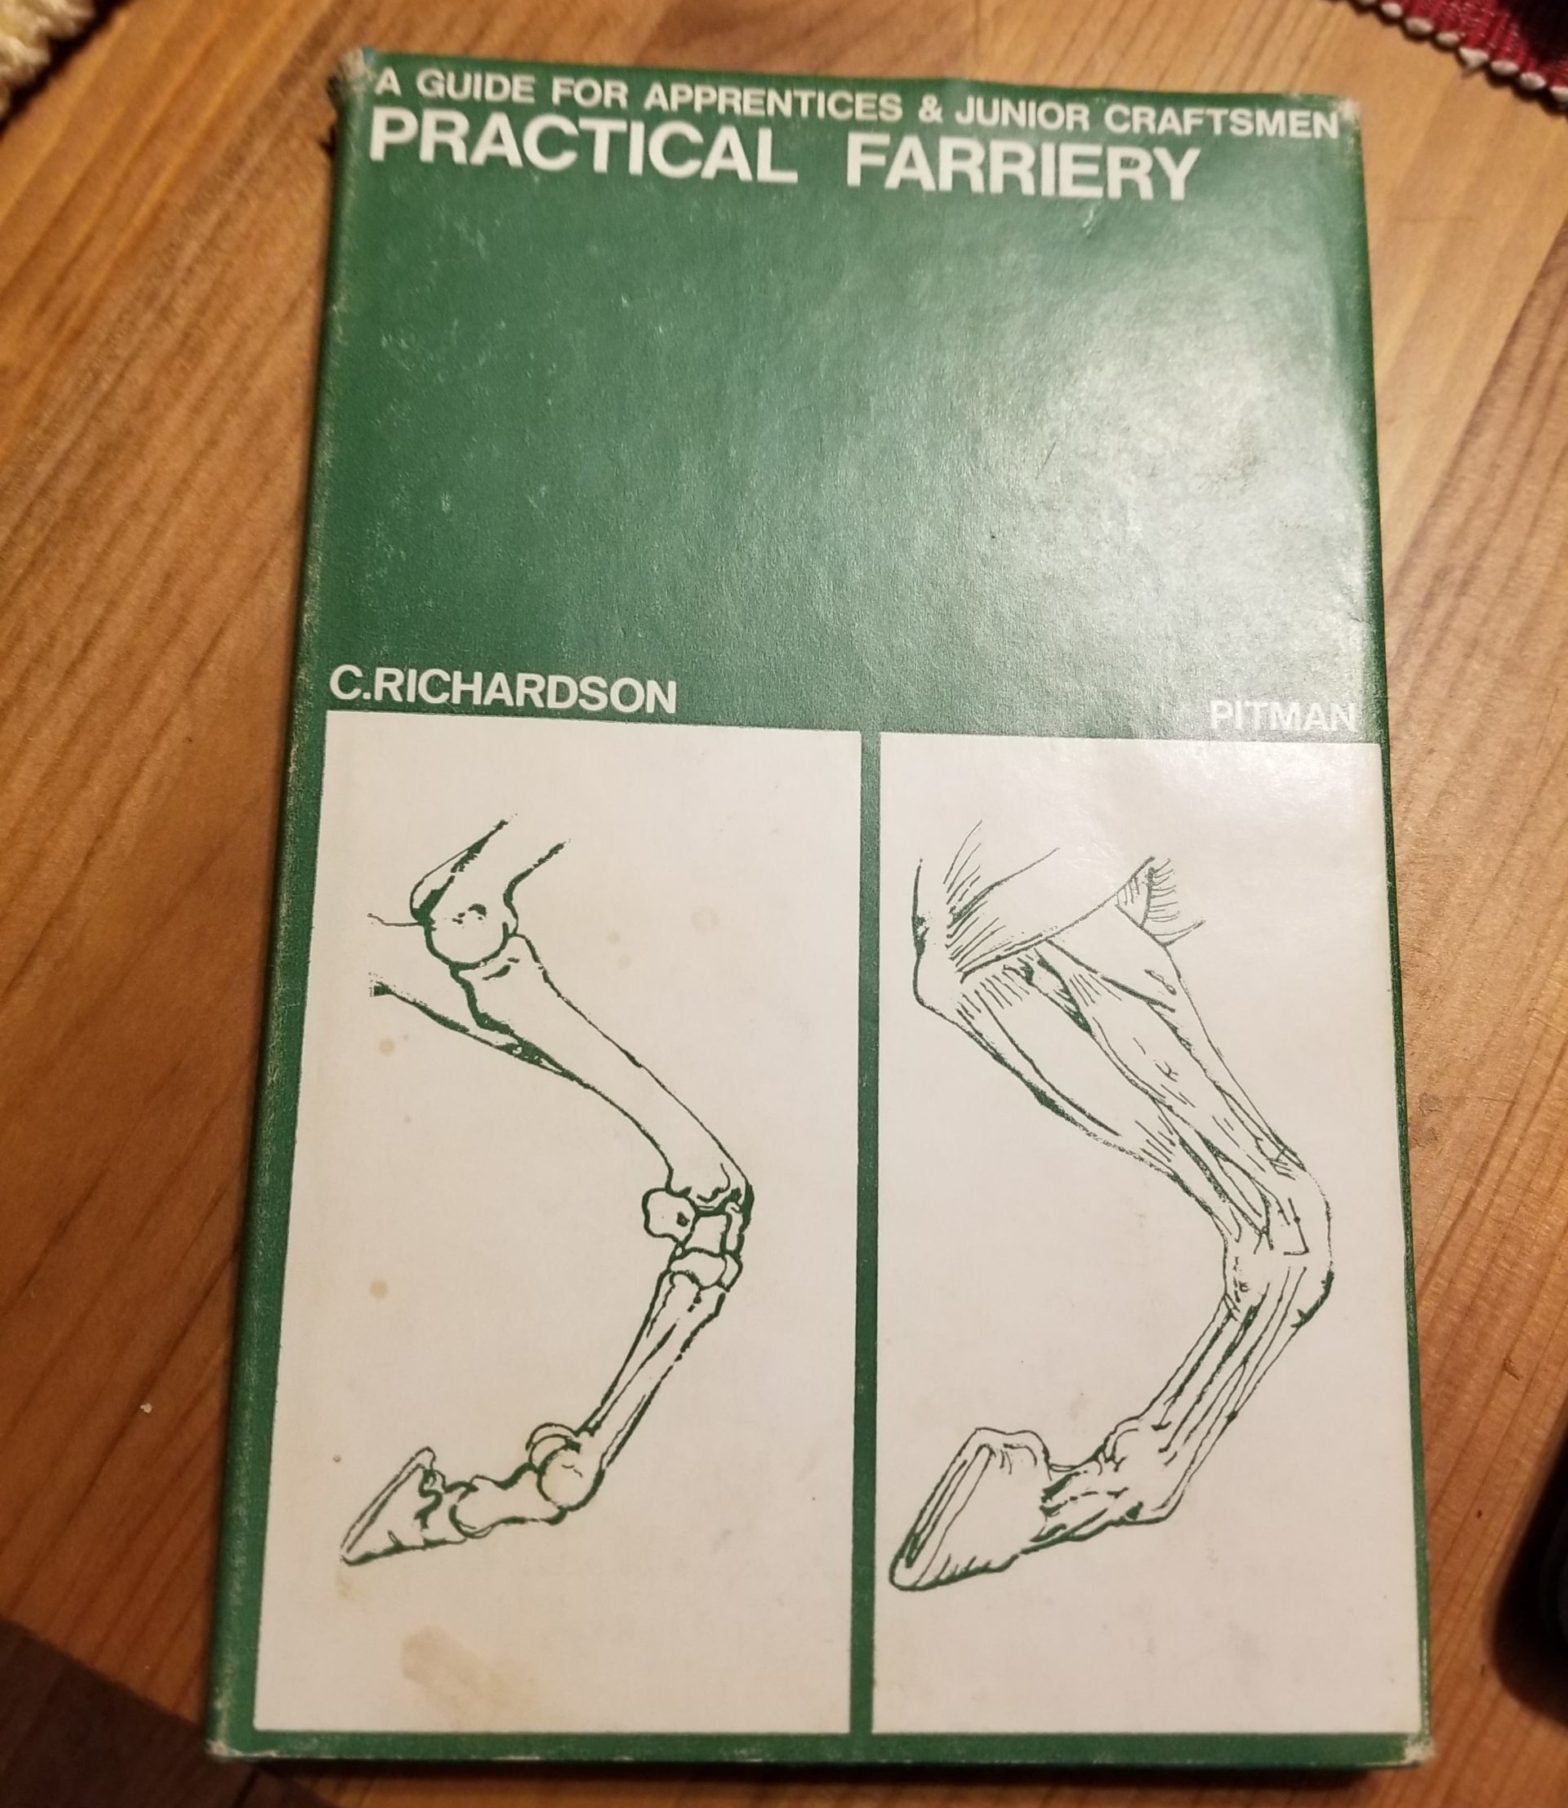 Practical Farriery Book Review